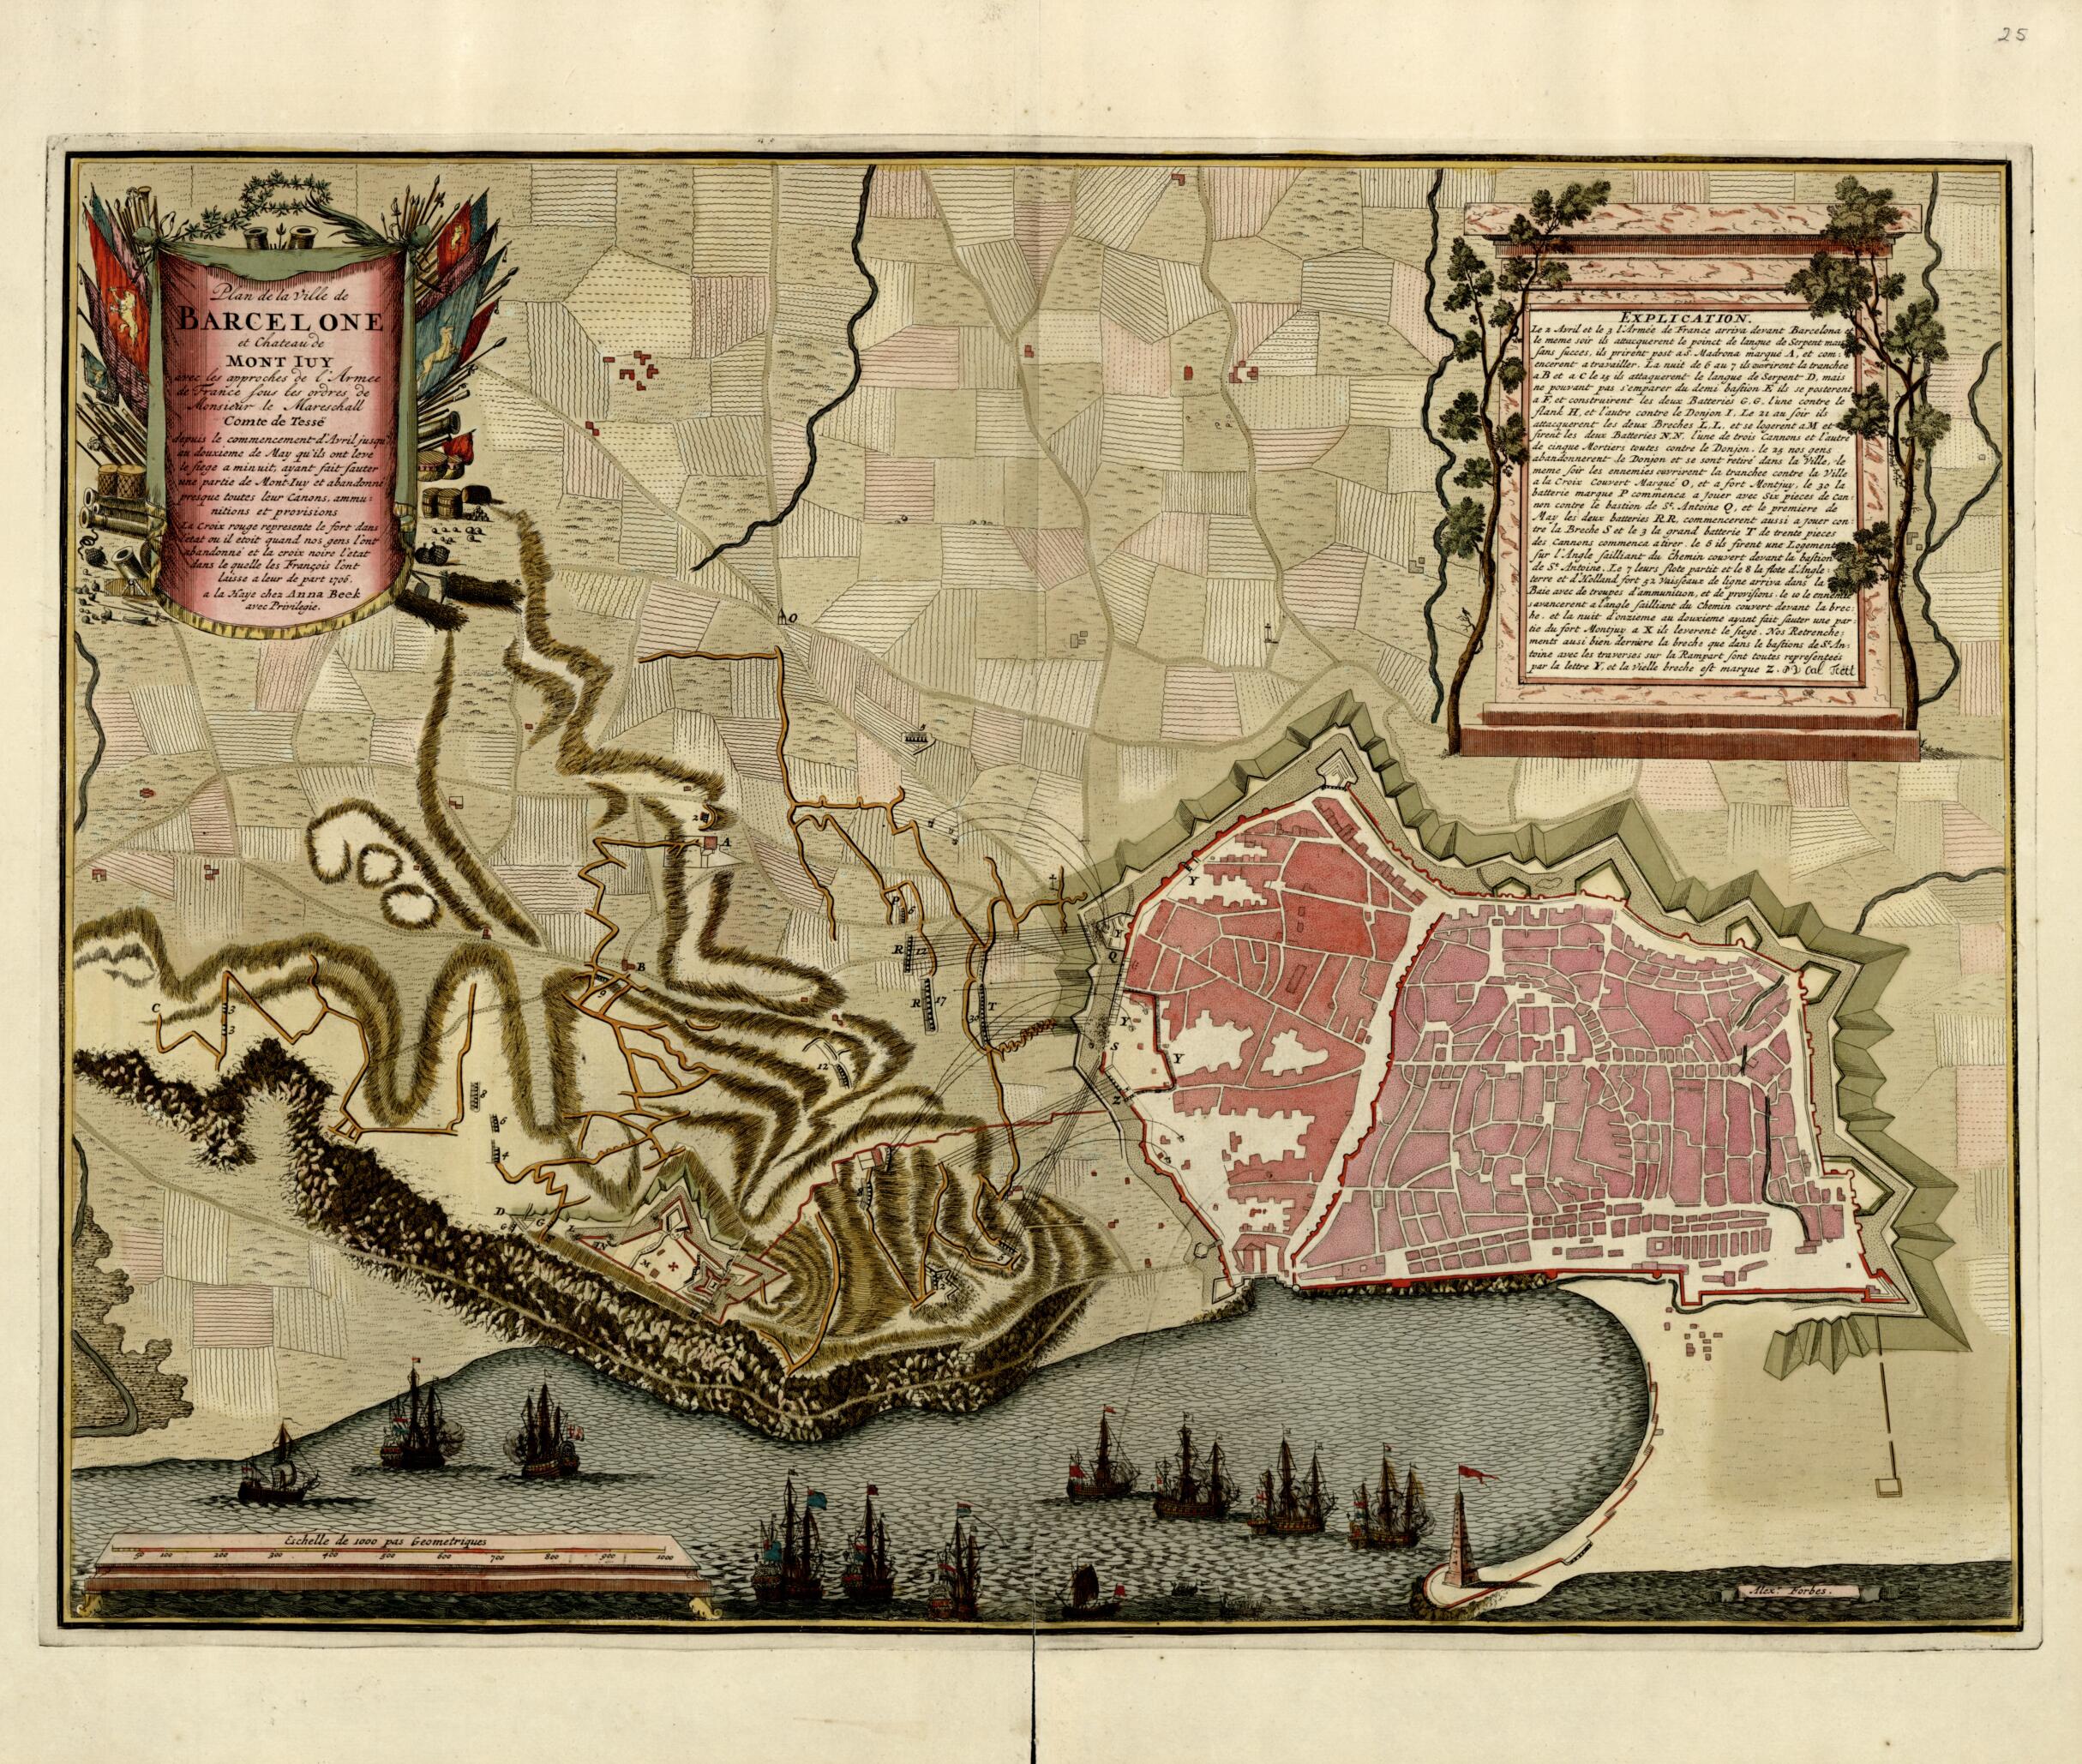 This old map of Plan De La Ville Barcelone Et Chateau De Mont Iuy a La Haye from a Collection of Plans of Fortifications and Battles, 1684-from 1709 from 1709 was created by Anna Beeck in 1709